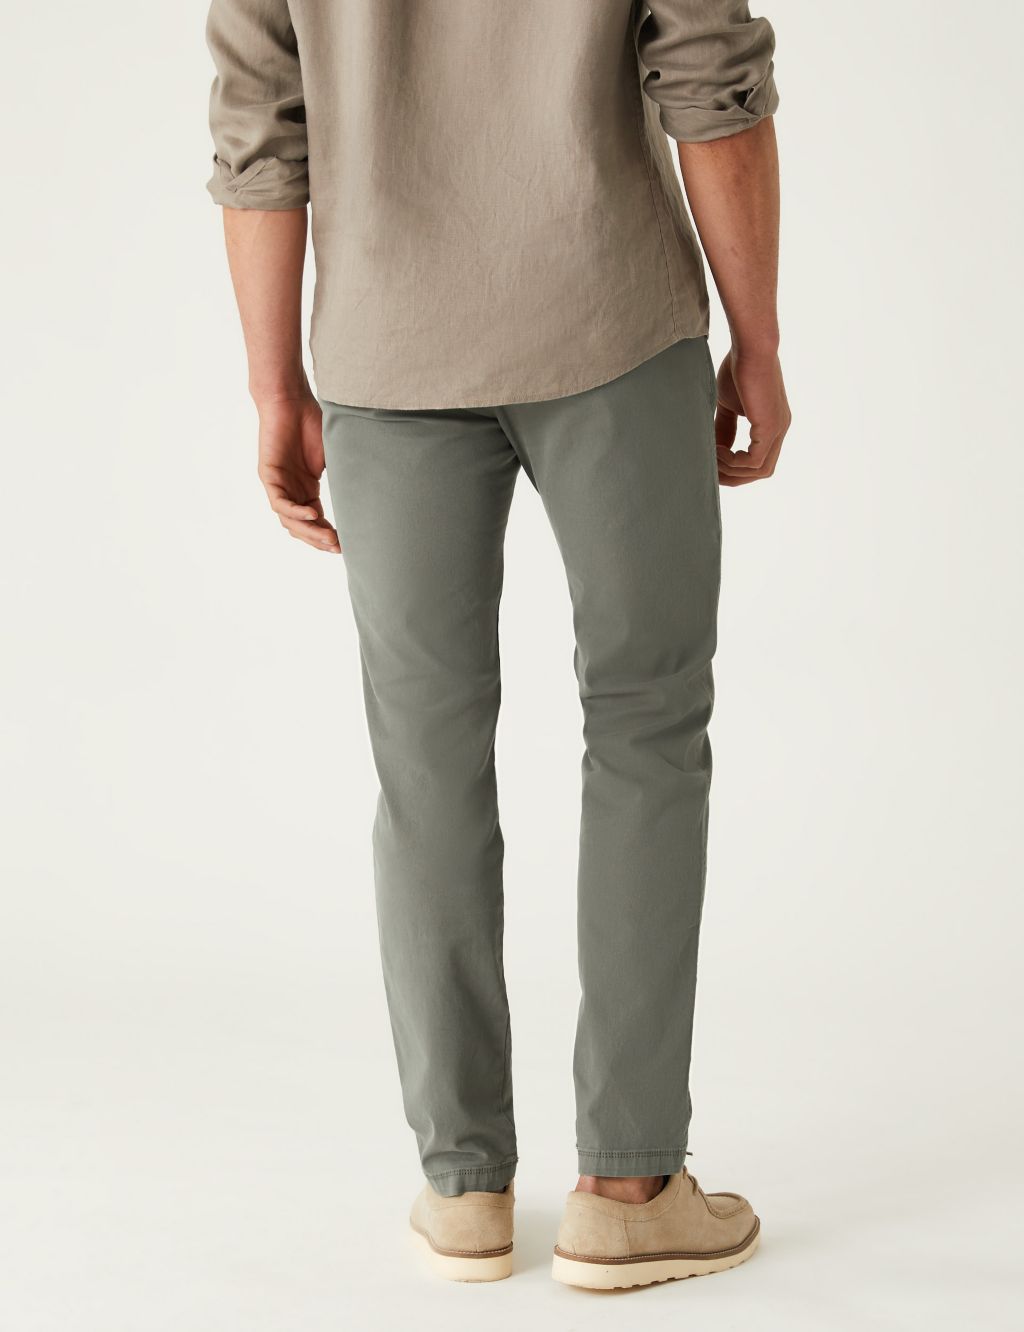 Slim Fit Textured Stretch Trousers image 3